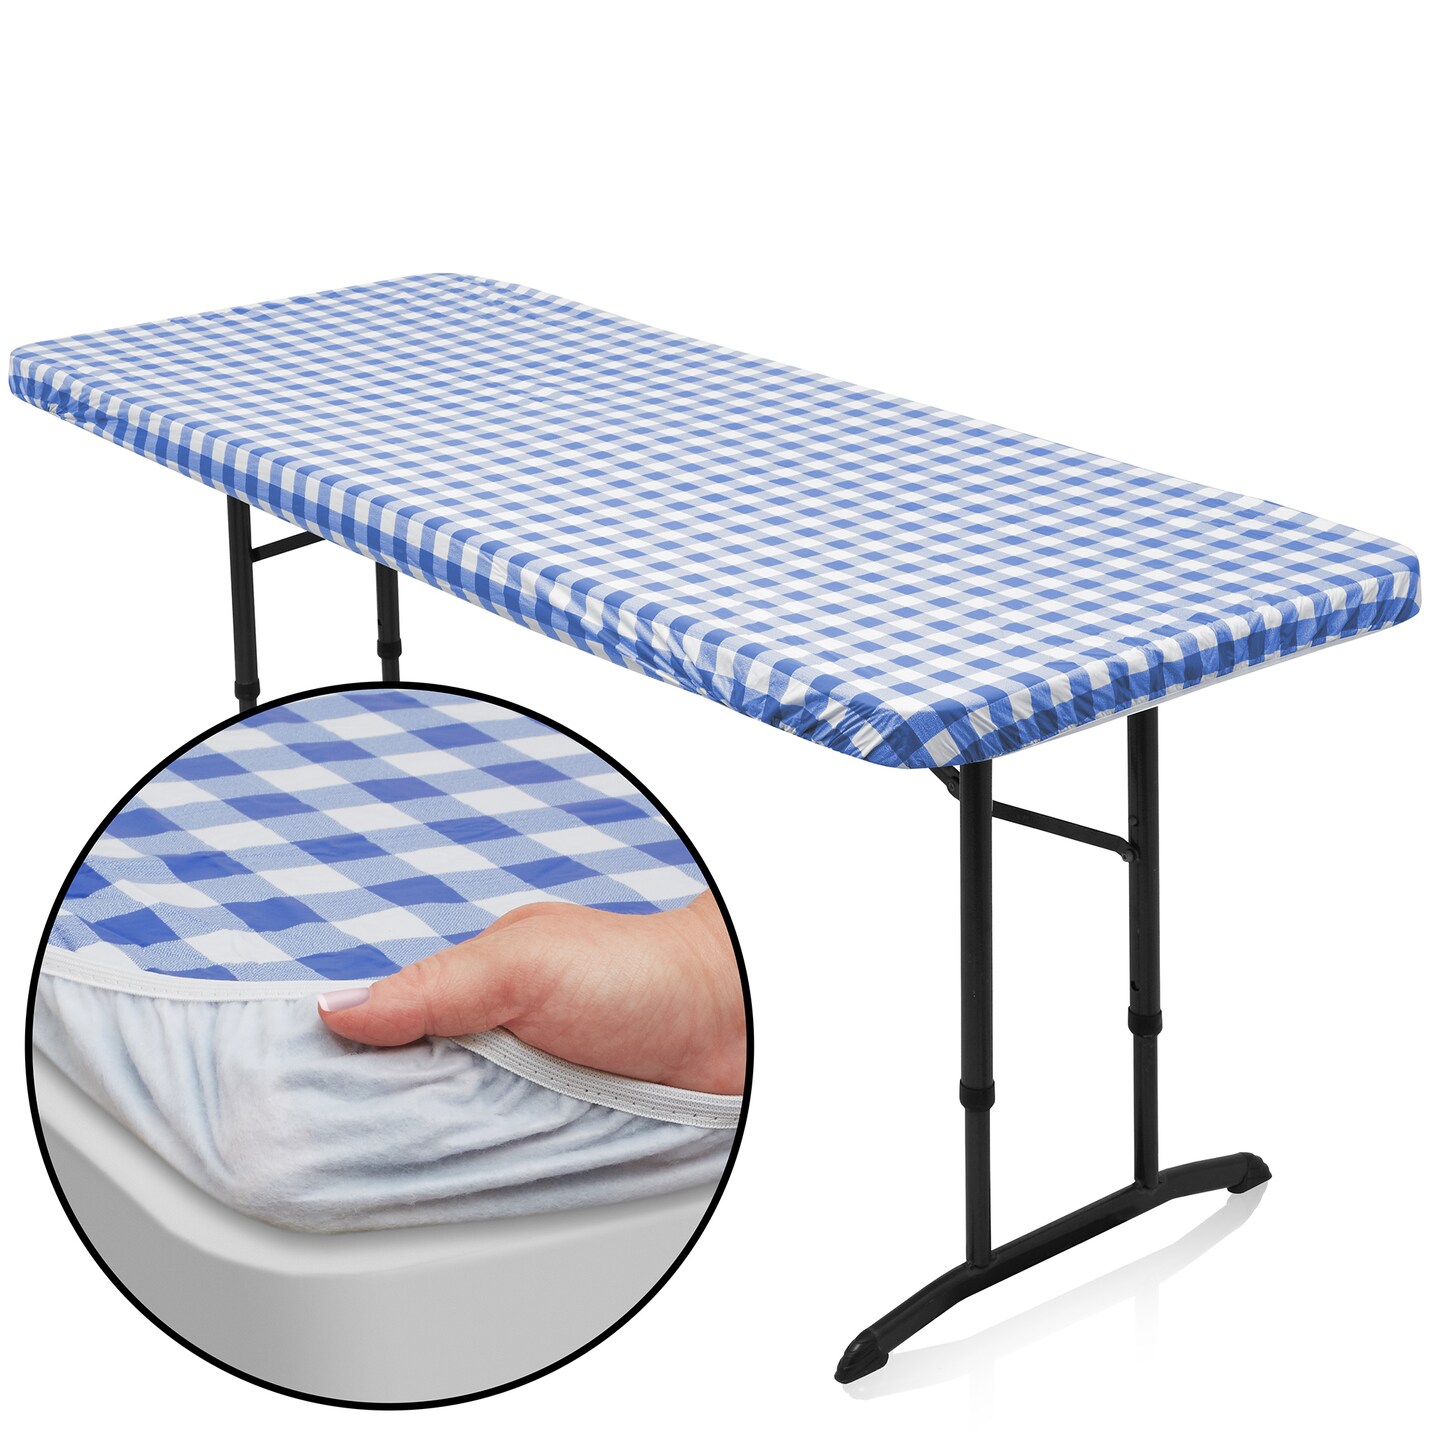 Lann&#x27;s Linens Vinyl Tablecloth with Flannel Backing, Patterned - Fitted Waterproof Table Cover for Indoor / Outdoor Use